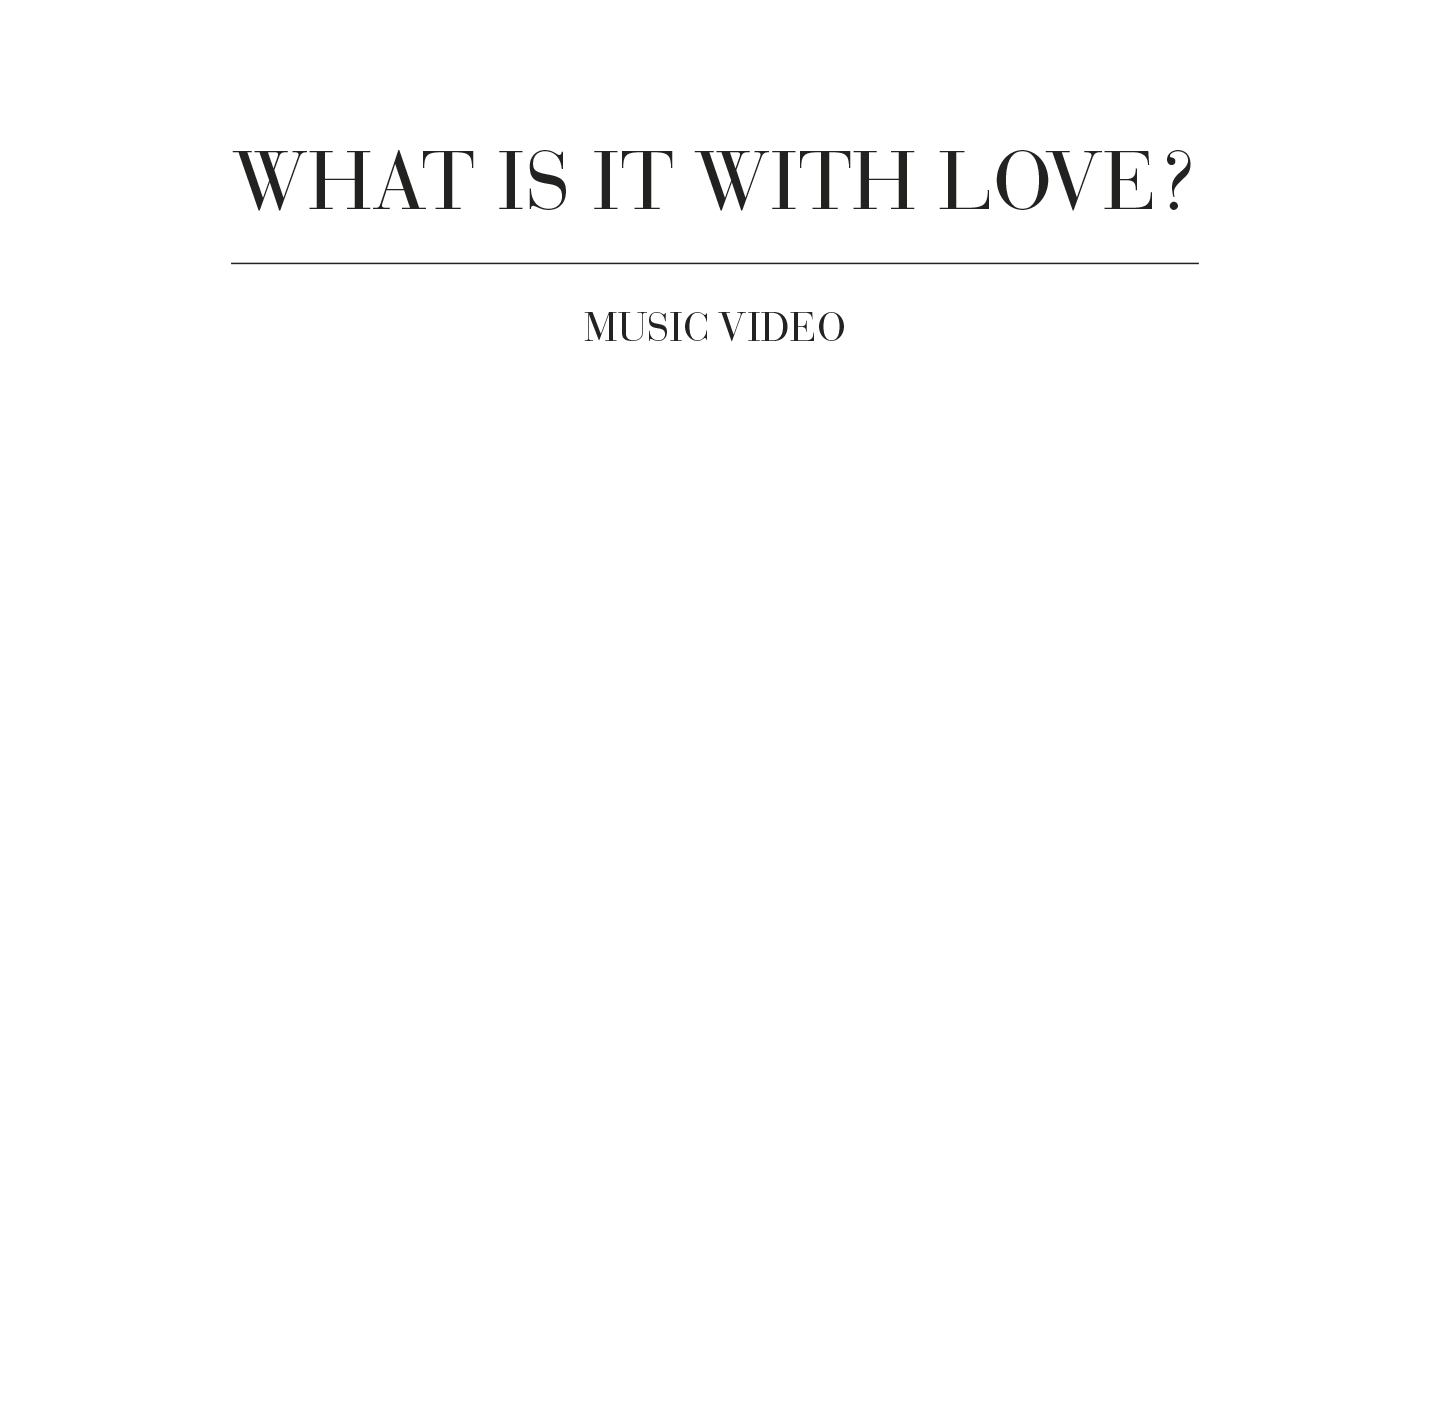 What Is it with love music video